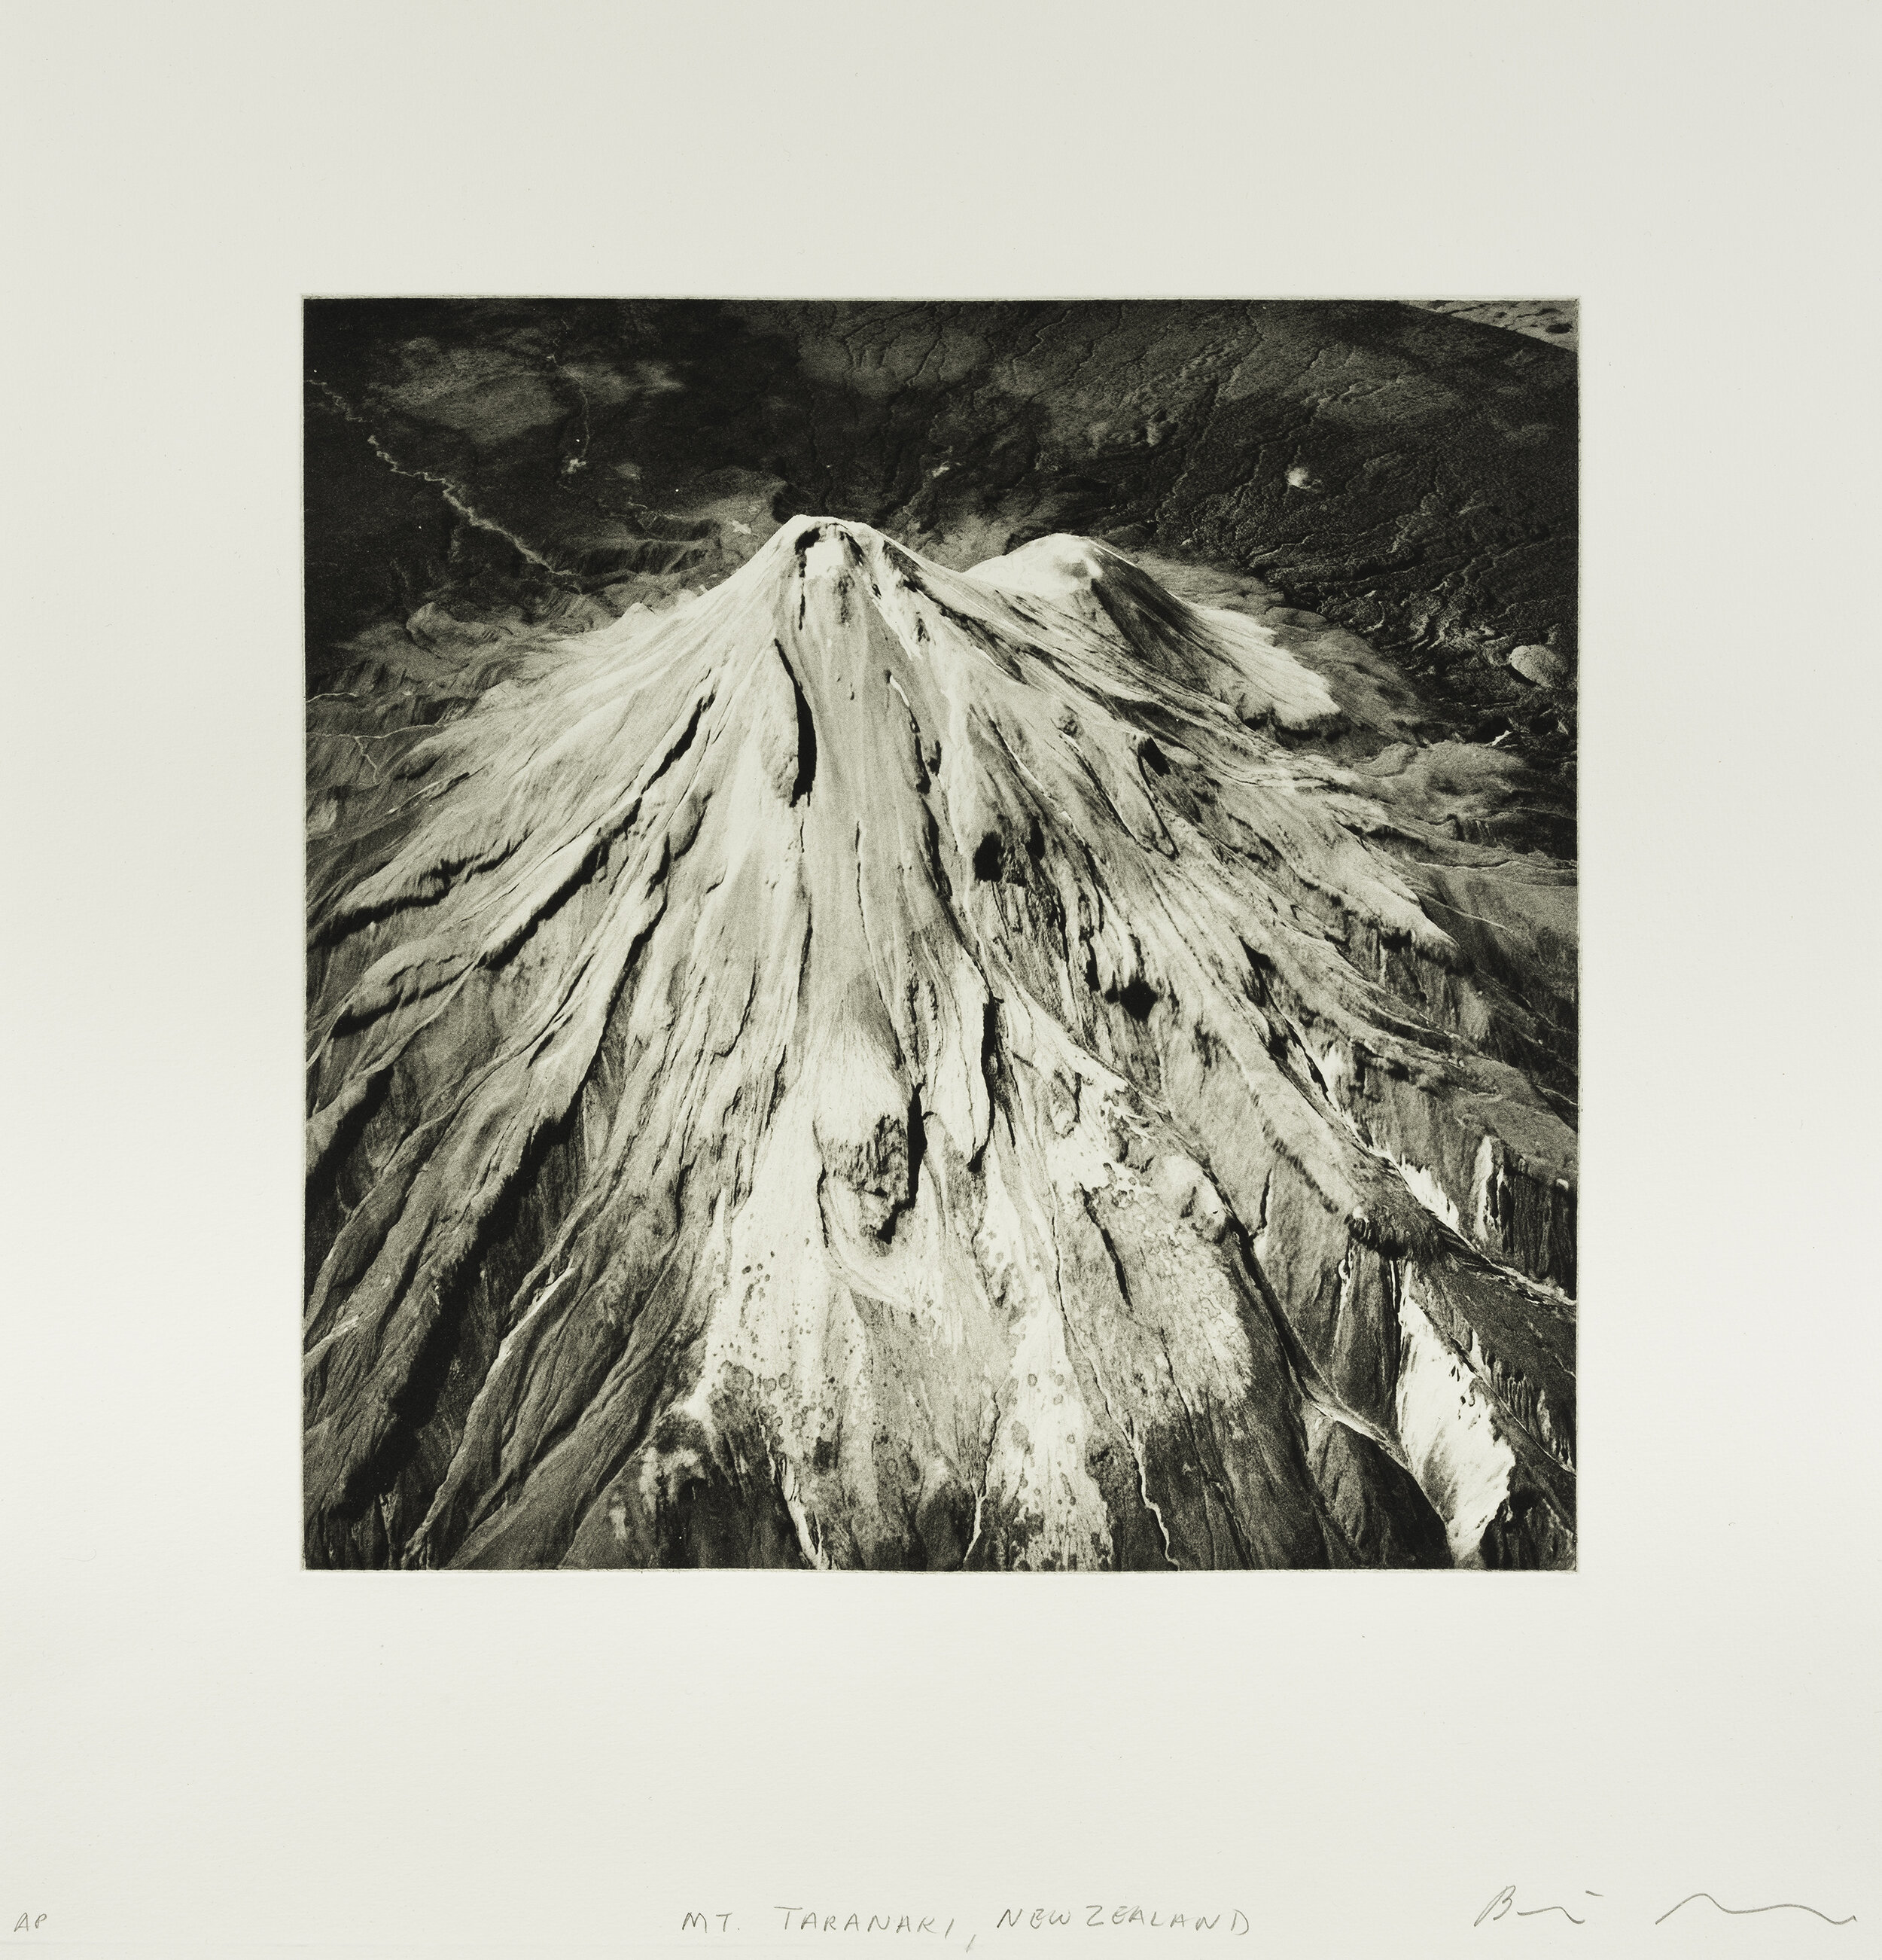    Mount Taranaki, New Zealand, 2020   Copperplate photogravure etching on cotton rag paper, plate size; 10.6 x 10.6, paper size; 16 x 15.5, edition 10  